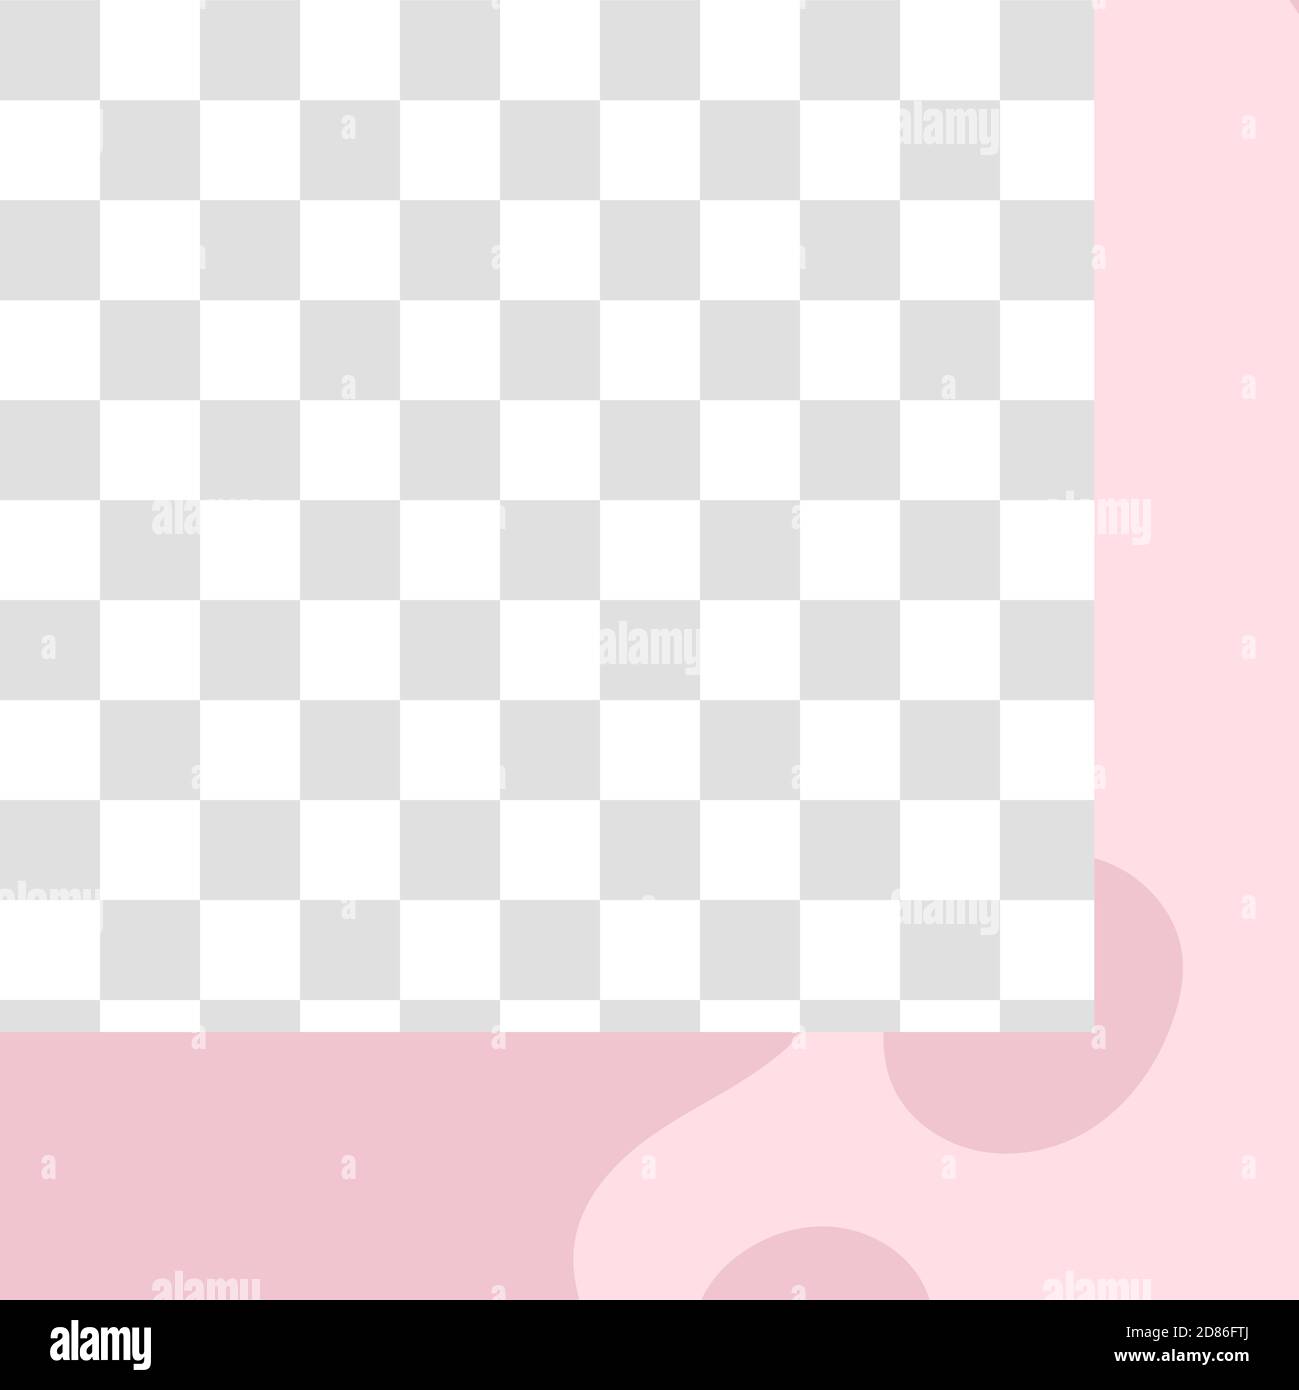 Pink floral post. Cute abstract social media post template Stock Vector